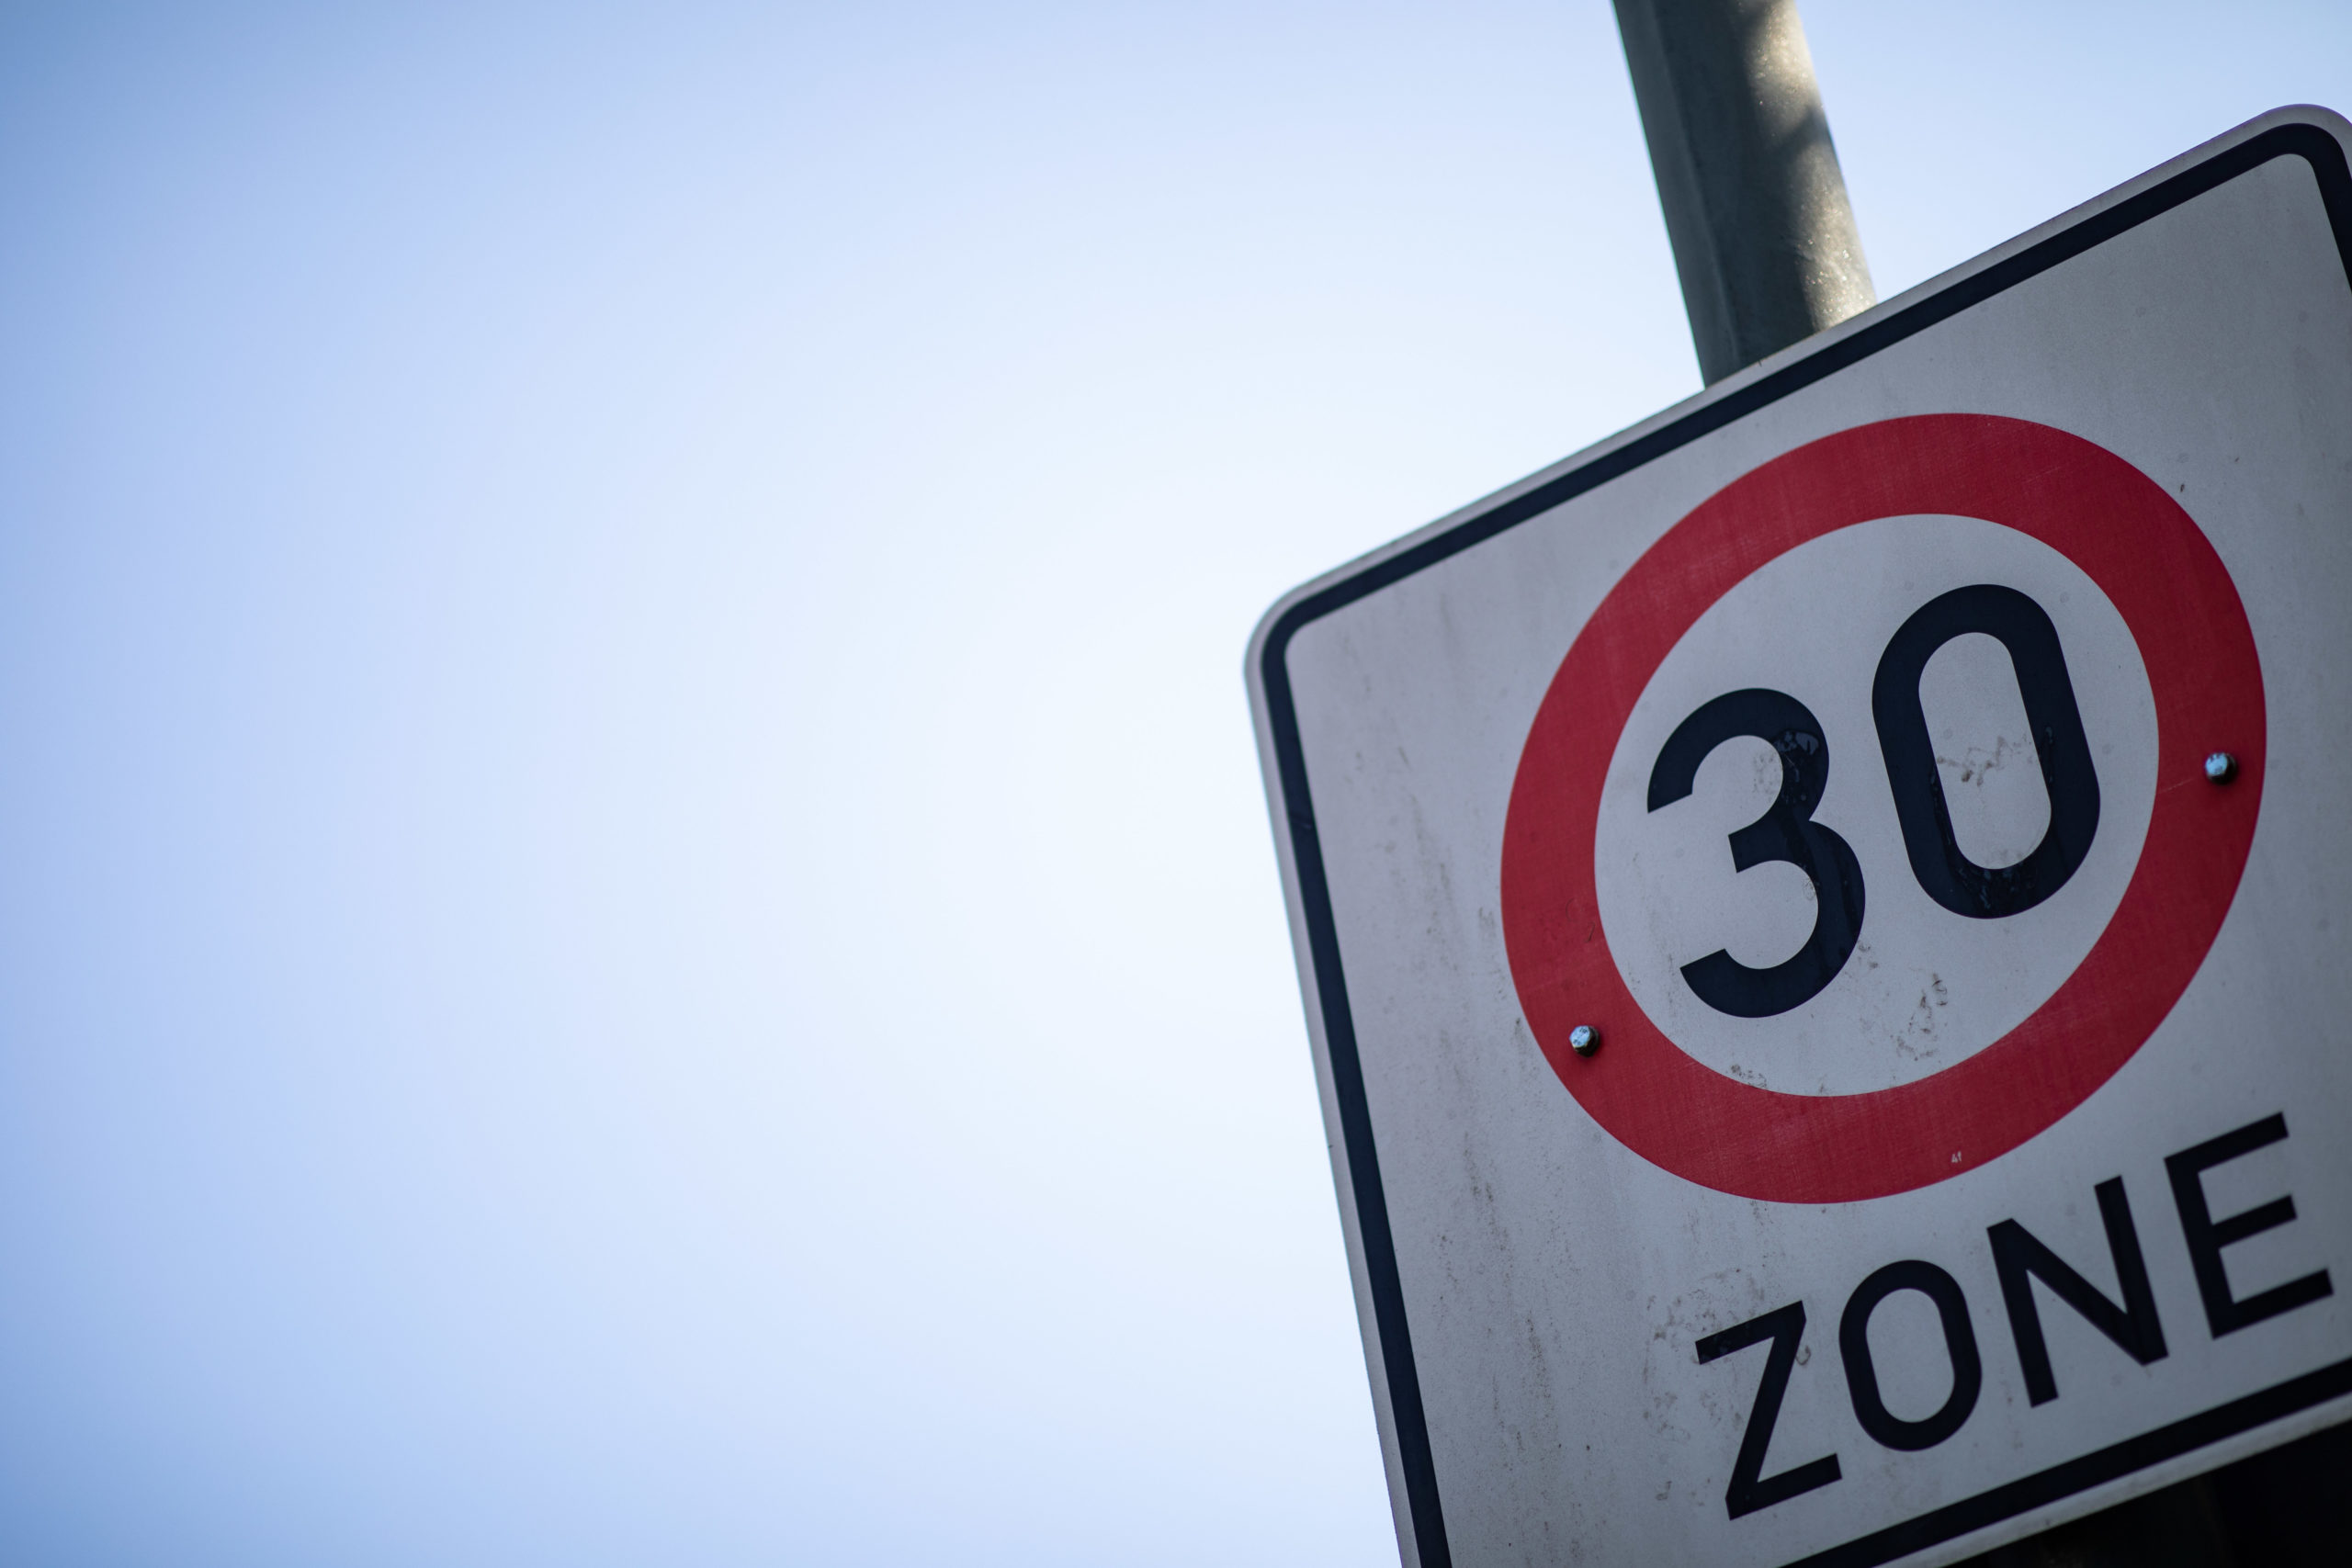 Flanders favors 30 kph speed limit in built-up areas